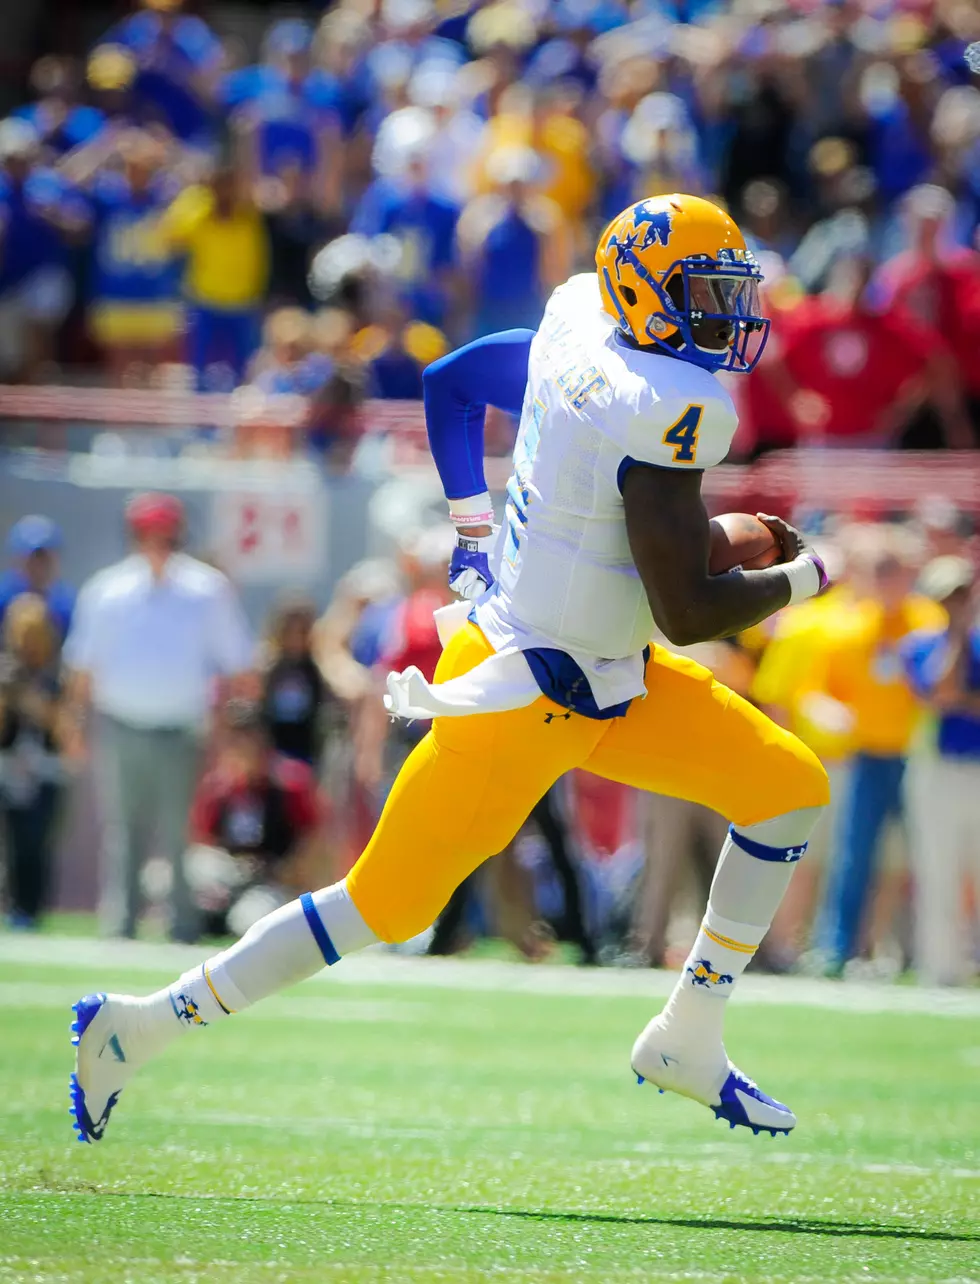 The Mcneese Cowboys Kick Off The Playoffs Against Sam Houston [VIDEO]